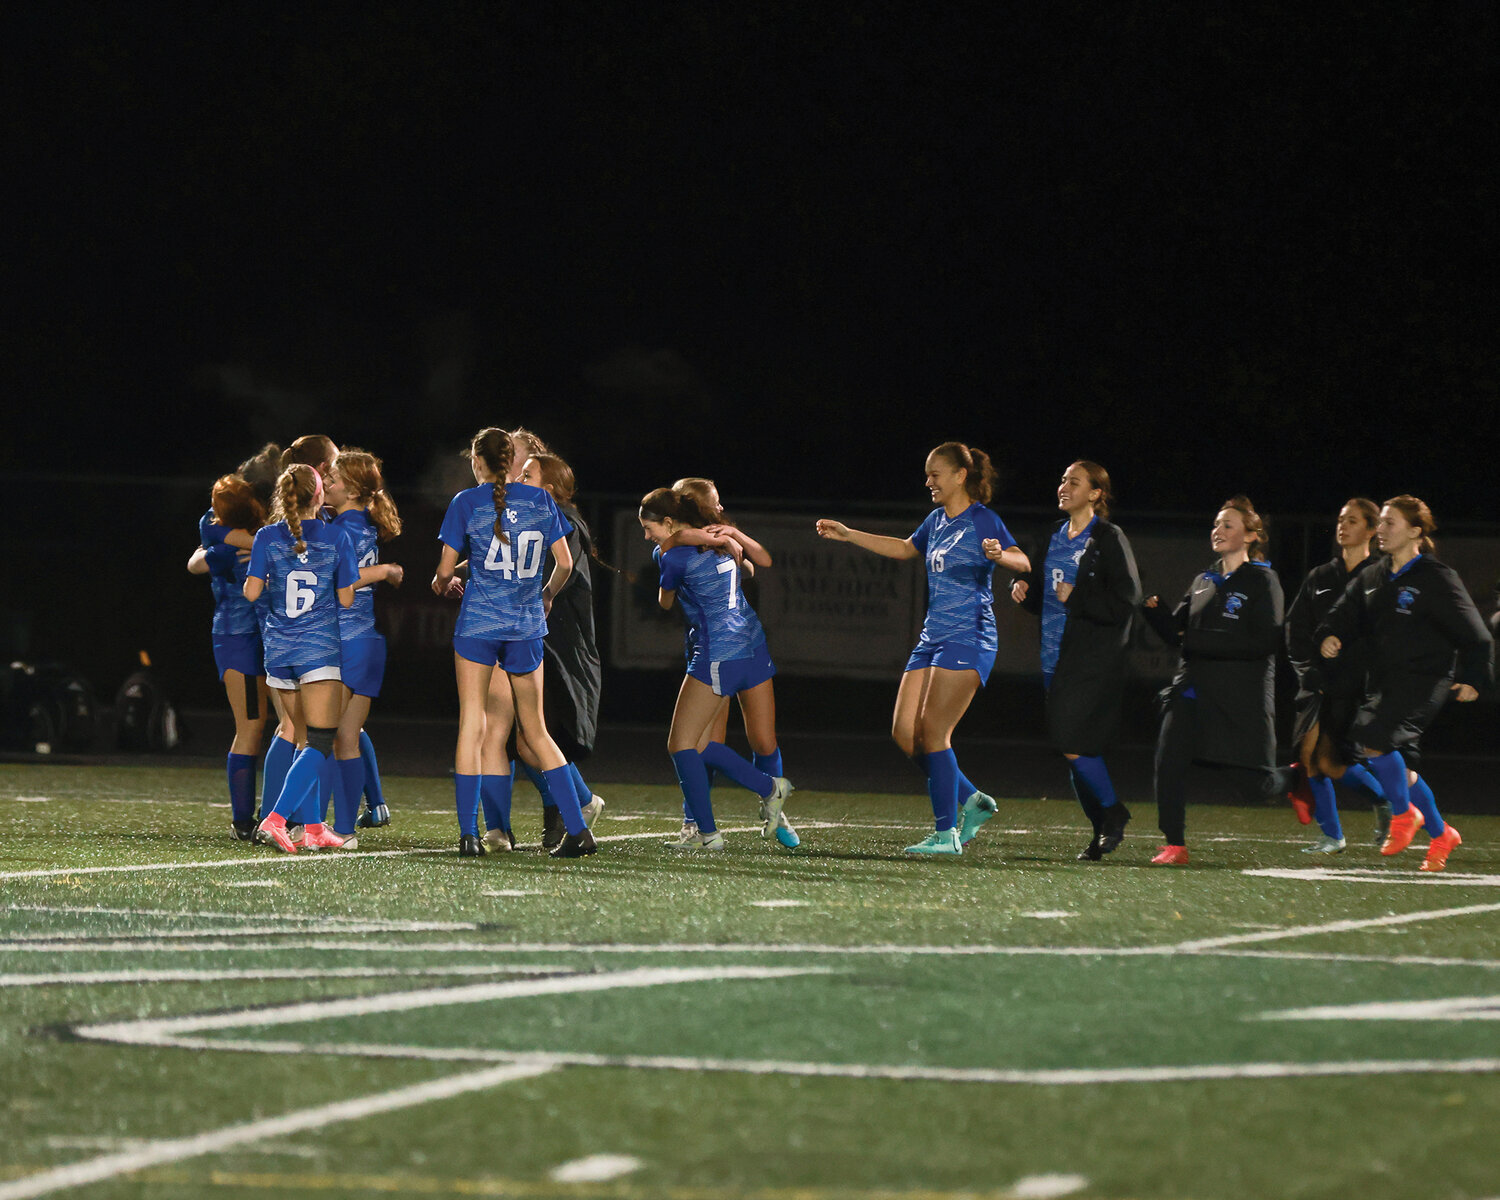 The La Center Wildcats girls soccer team celebrates its come-from-behind victory against Meridian High School in the first round of the 1A state playoffs on Wednesday, Nov. 8.